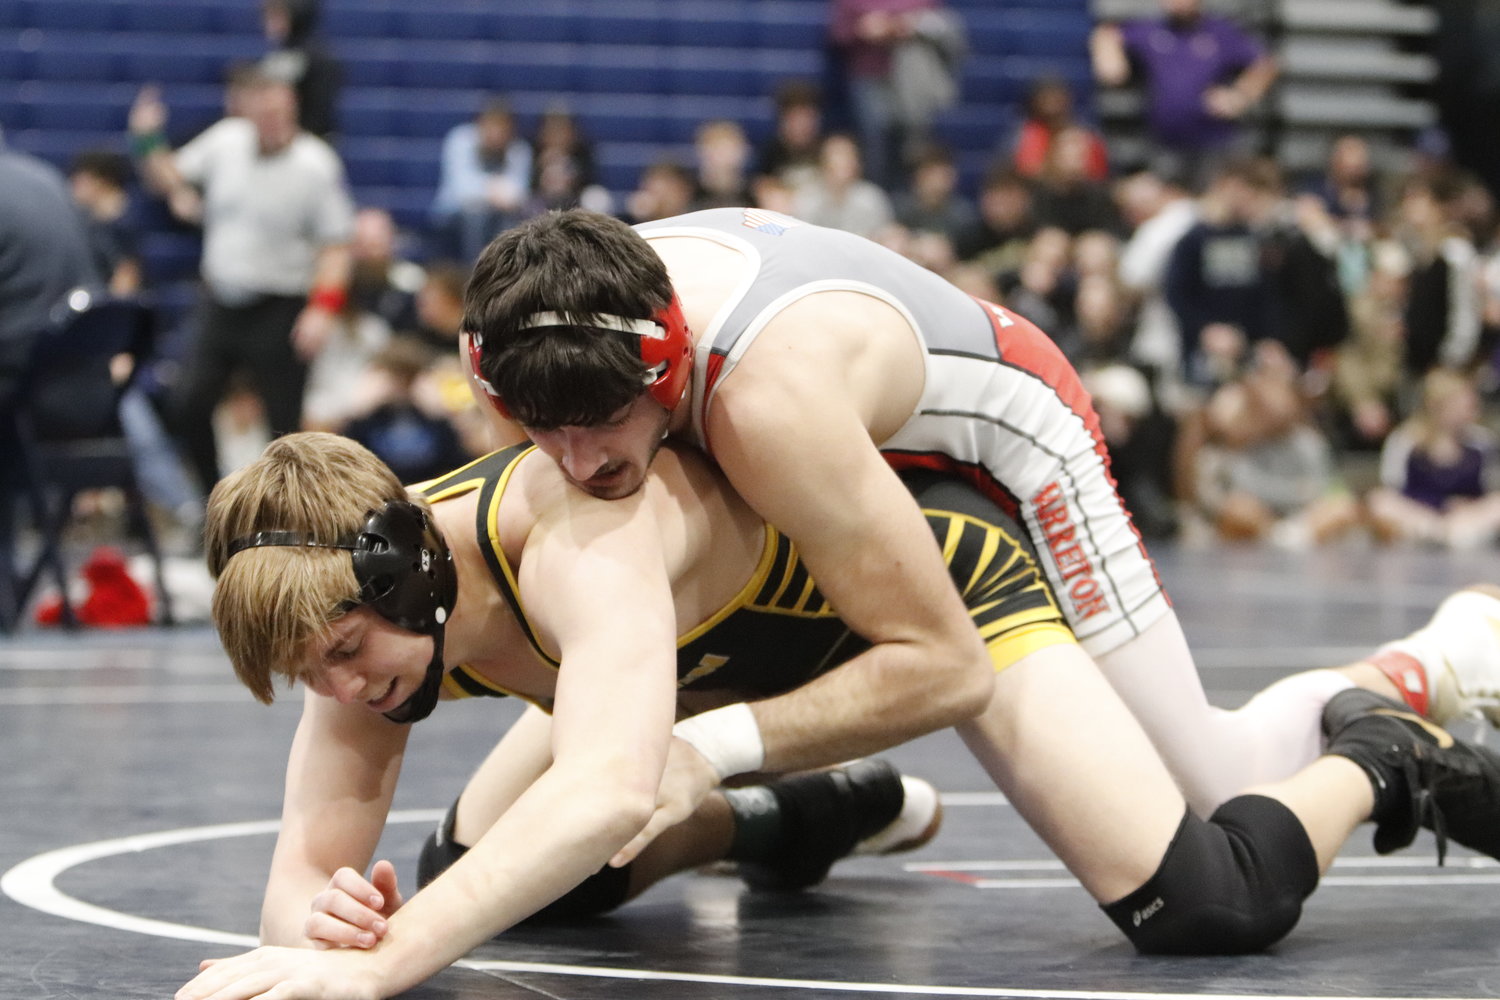 Jacob Ruff (right) wrestles at the St. Charles Invite earlier this month. Ruff earned three wins at the quad meet last week.